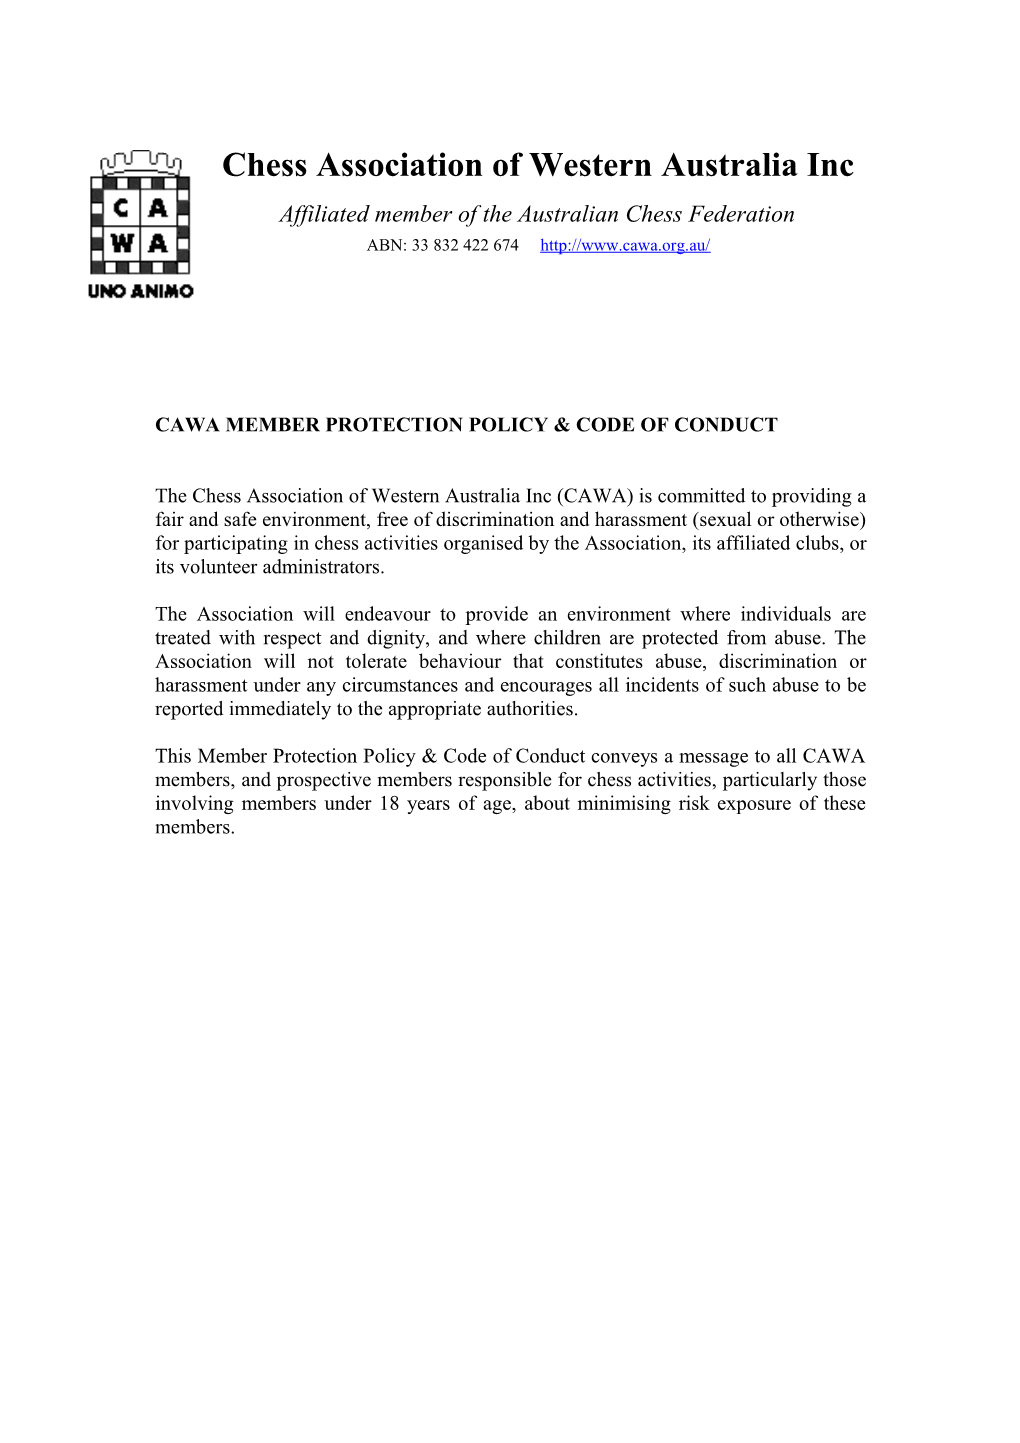 CAWA Member Protection Policy